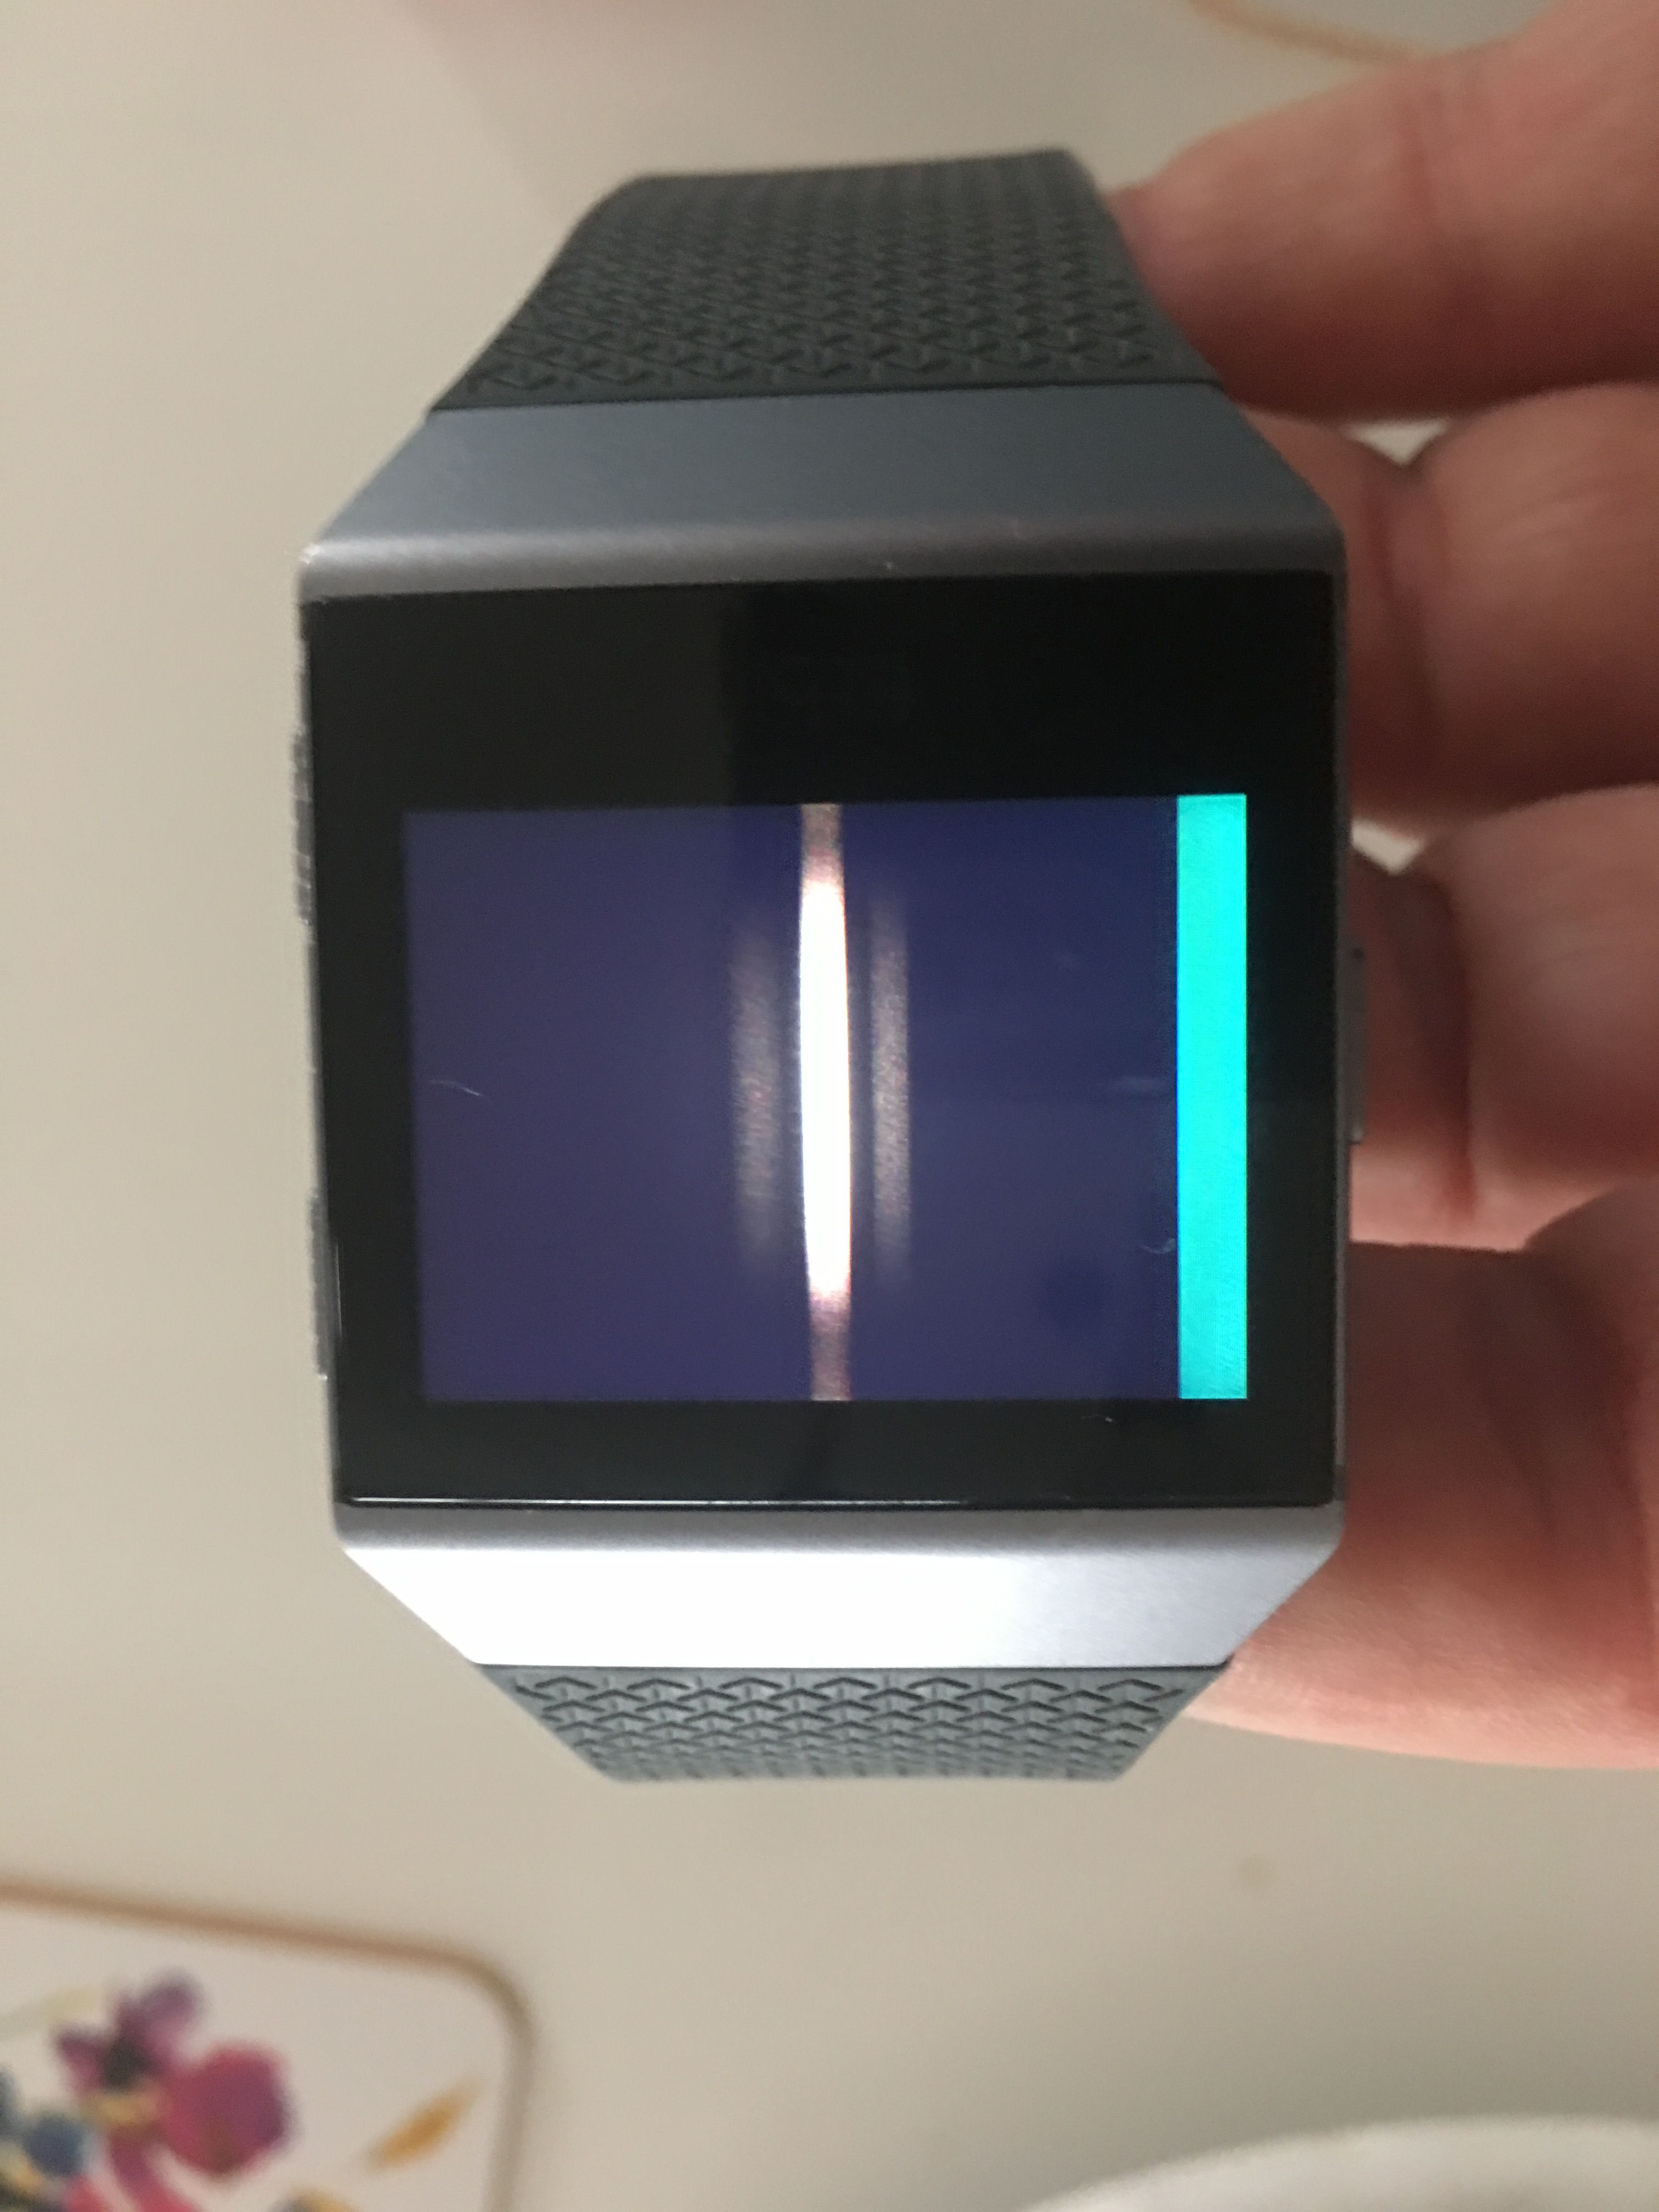 Solved: Fitbit Ionic display shown only 